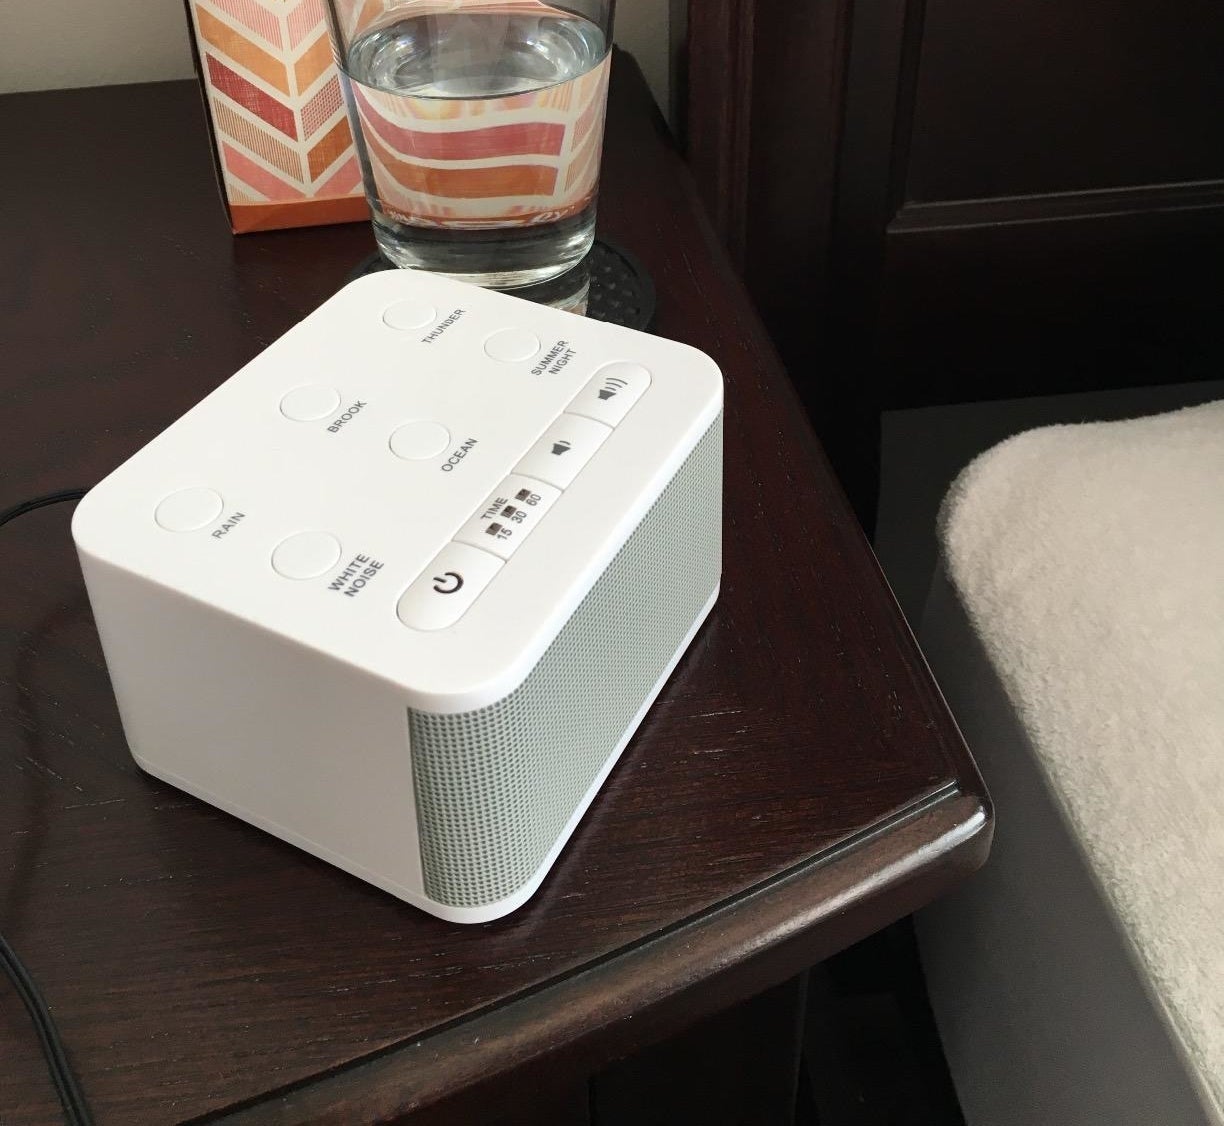 the white rectangular noise machine on a night stand